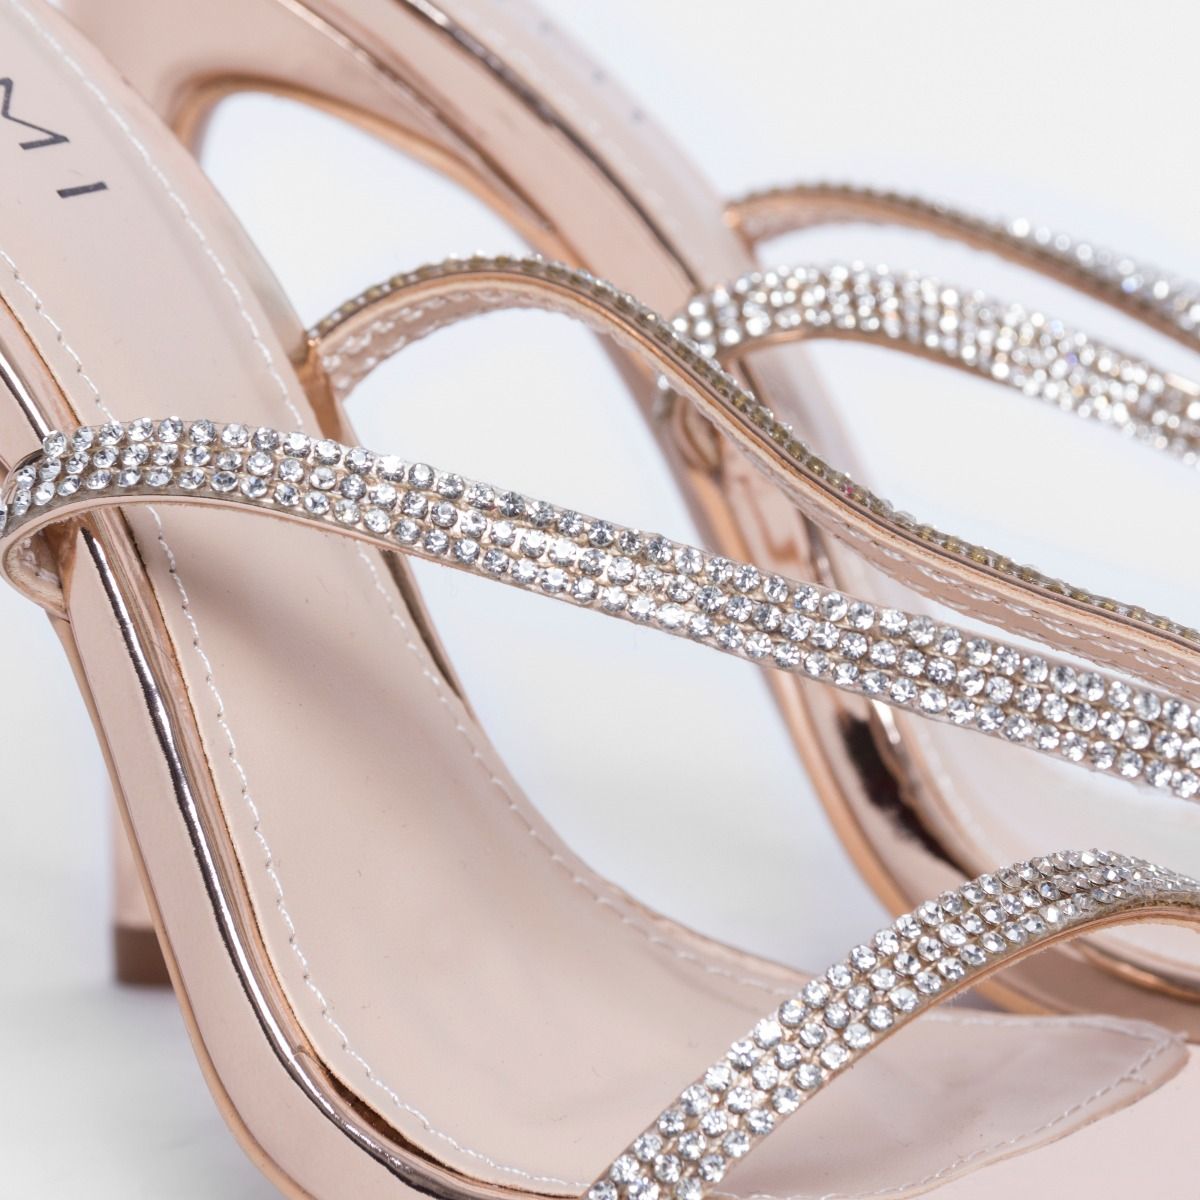 Korra Rose Gold Diamante Barely There Lace Up Heels